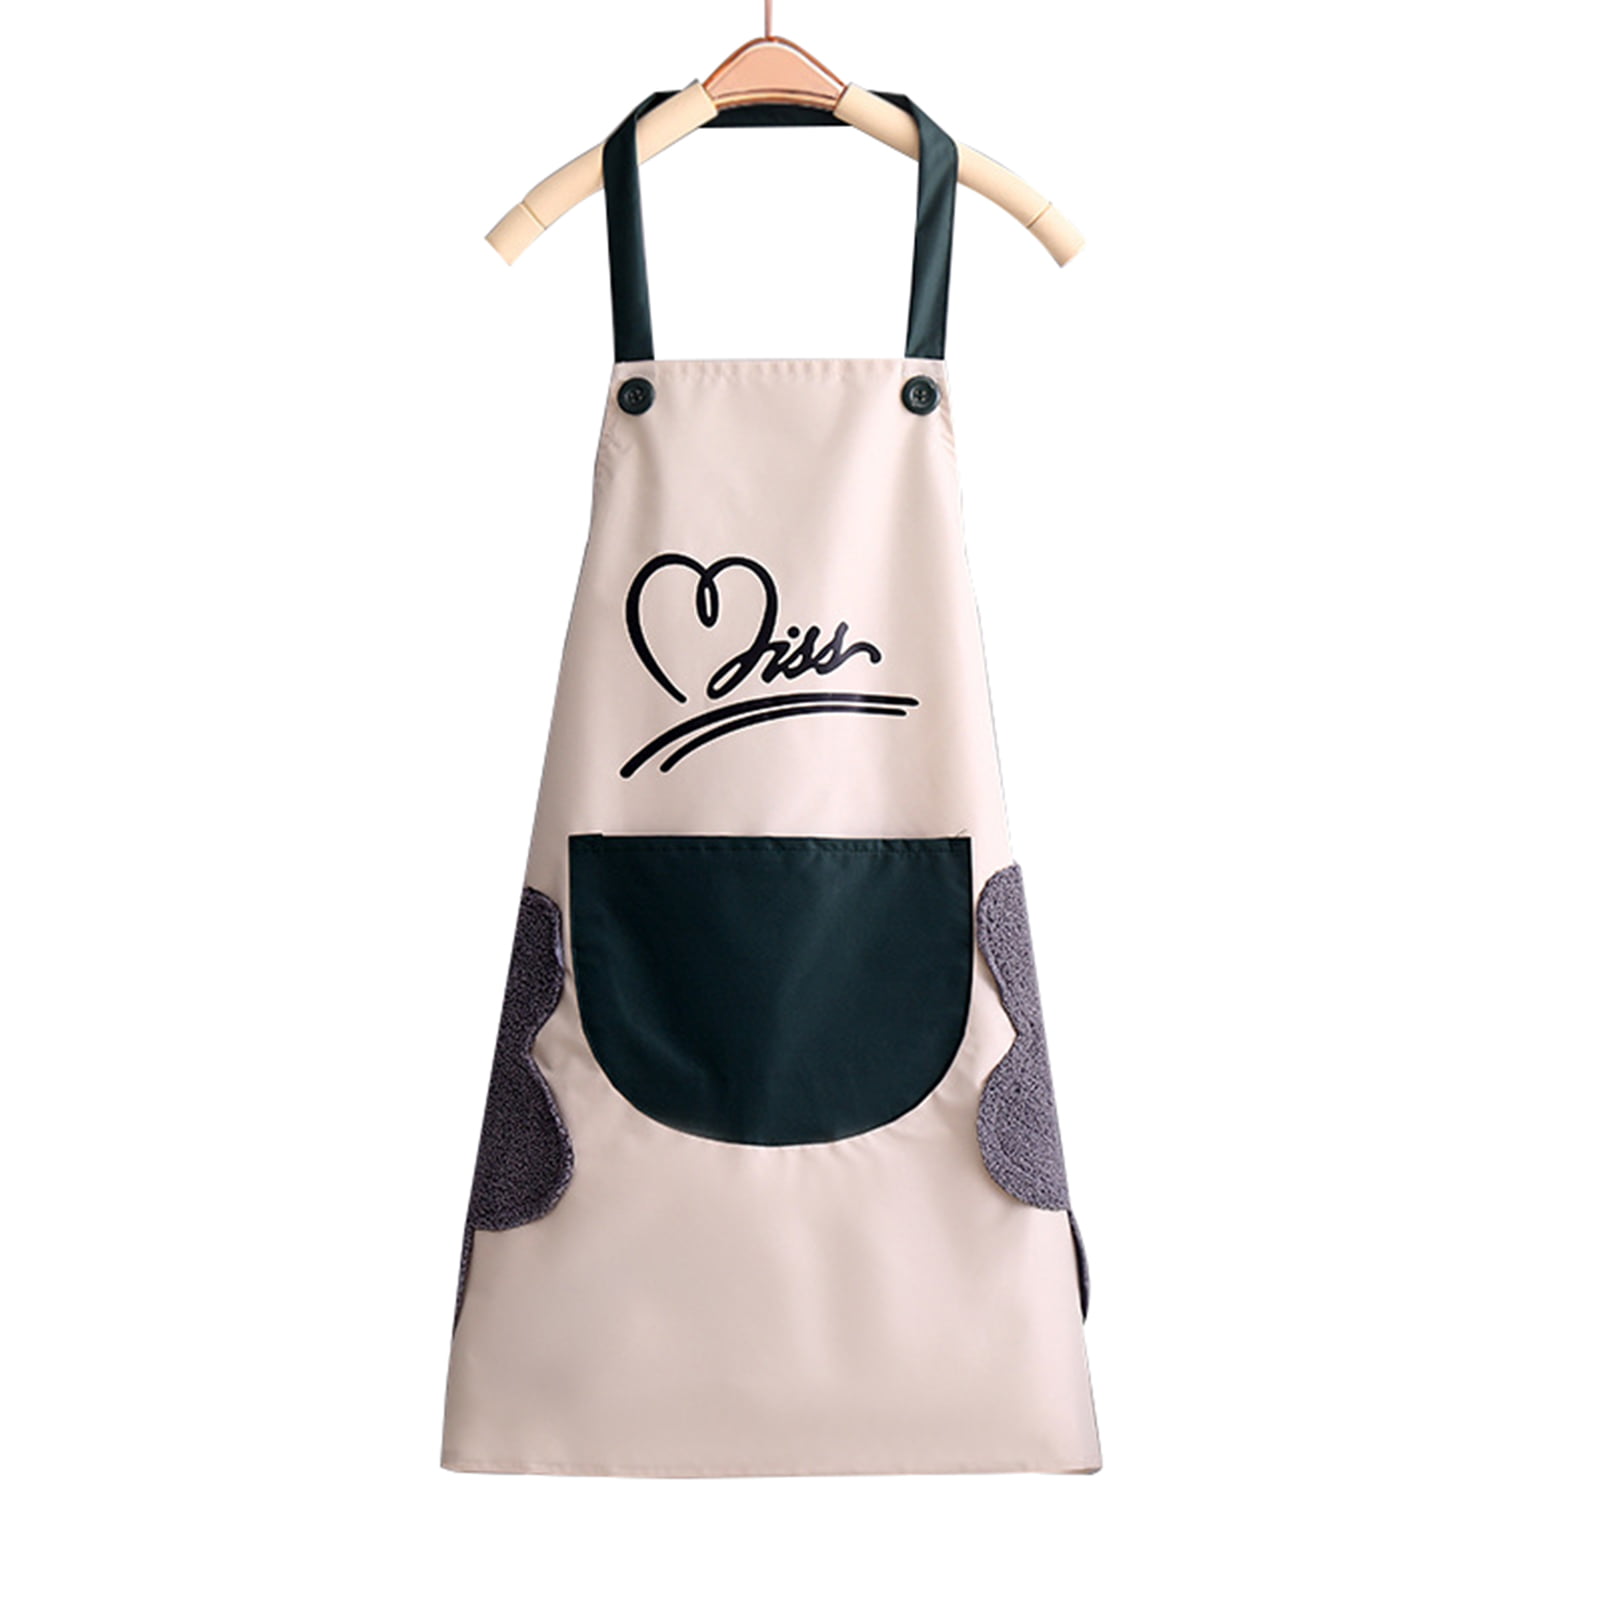 Full Apron 100% Cotton Cooking Apron for Women and Men Robin Apron for Adults Made In UK